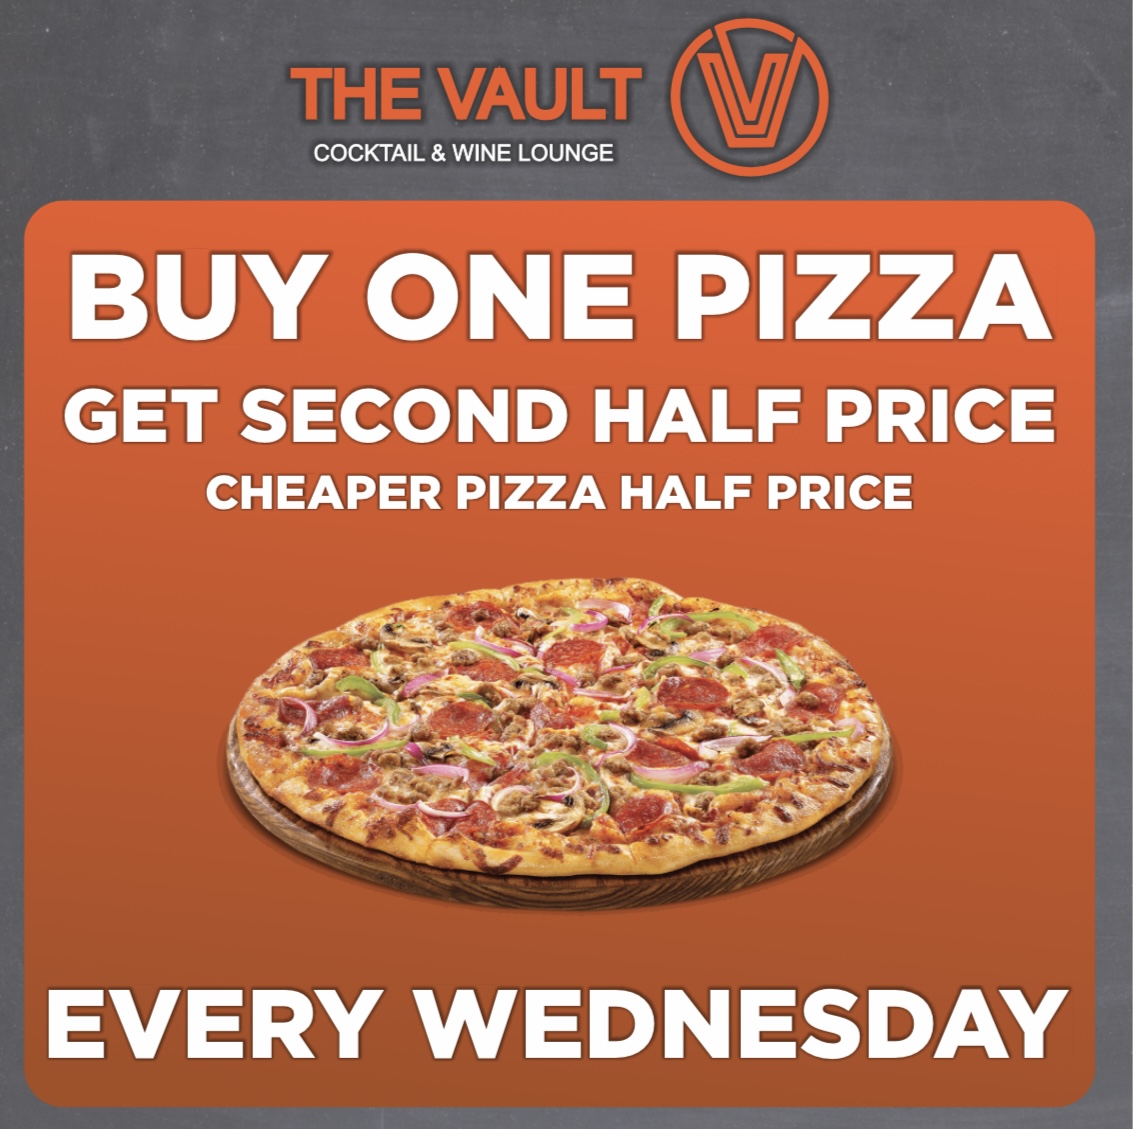 Buy one Pizza get the second half price every Wednesday